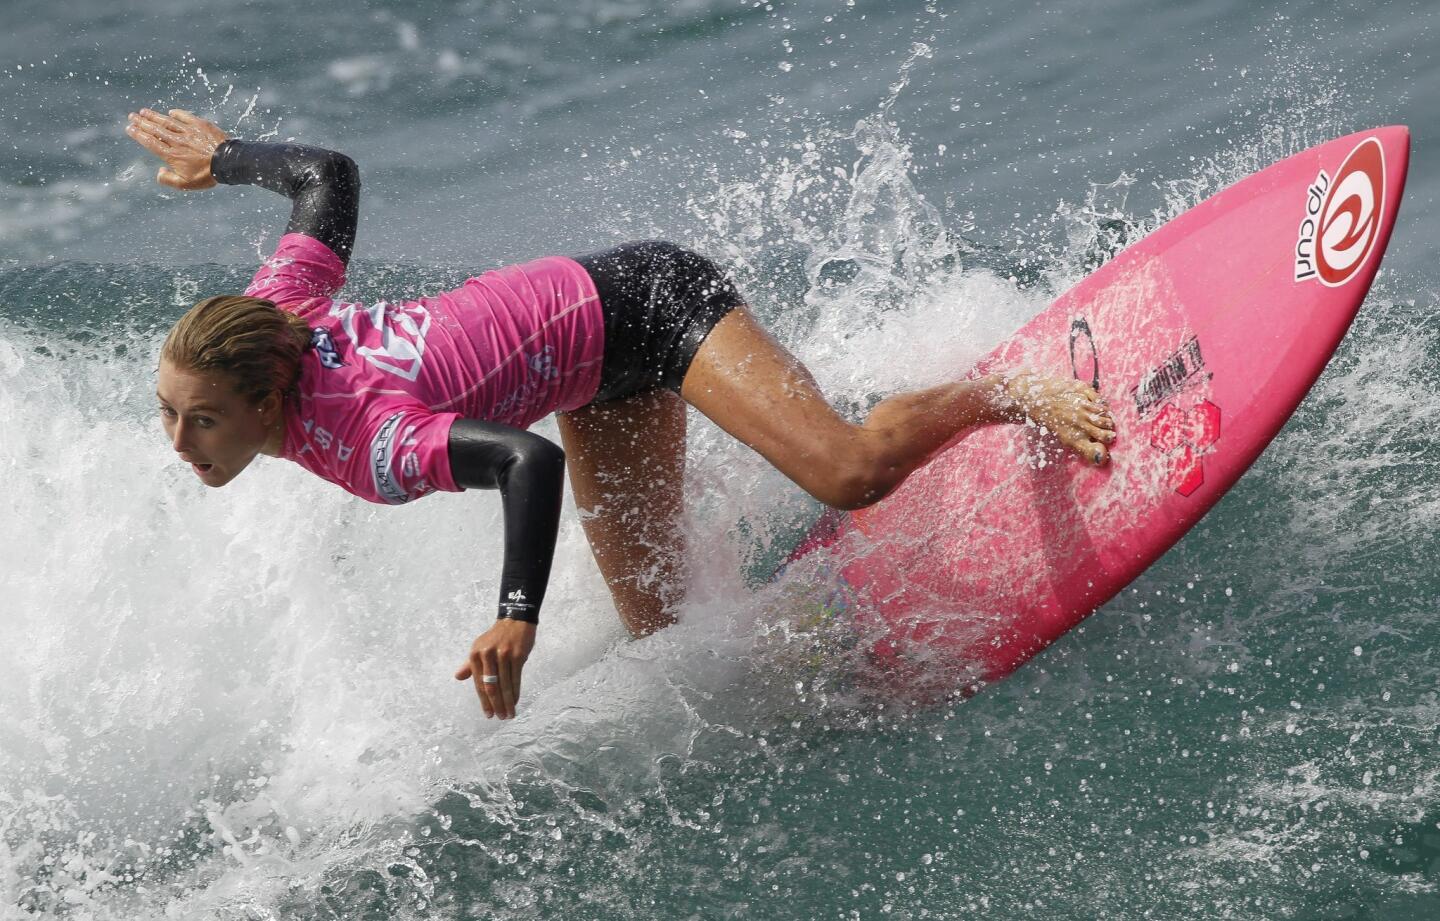 Nikki Van Dijk of Australia competes in Heat 2 of Round 4 of the Paul Mitchell Supergirl Pro surf contest at the Oceanside Pier on Saturday, August 9, 2014.